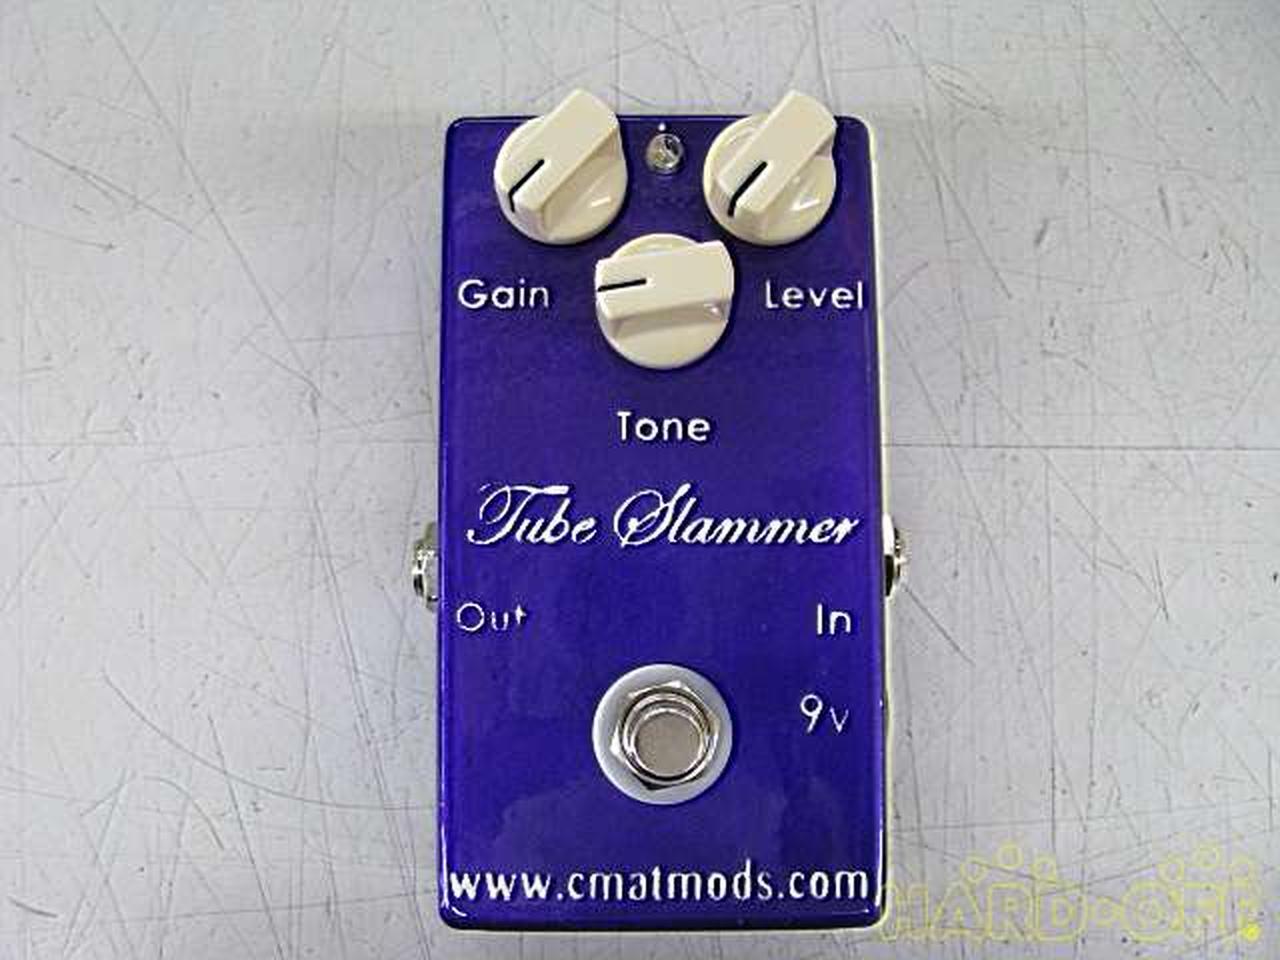 Cmatmods Tube Slammer Cmatmods/Tube Safe delivery from Japan